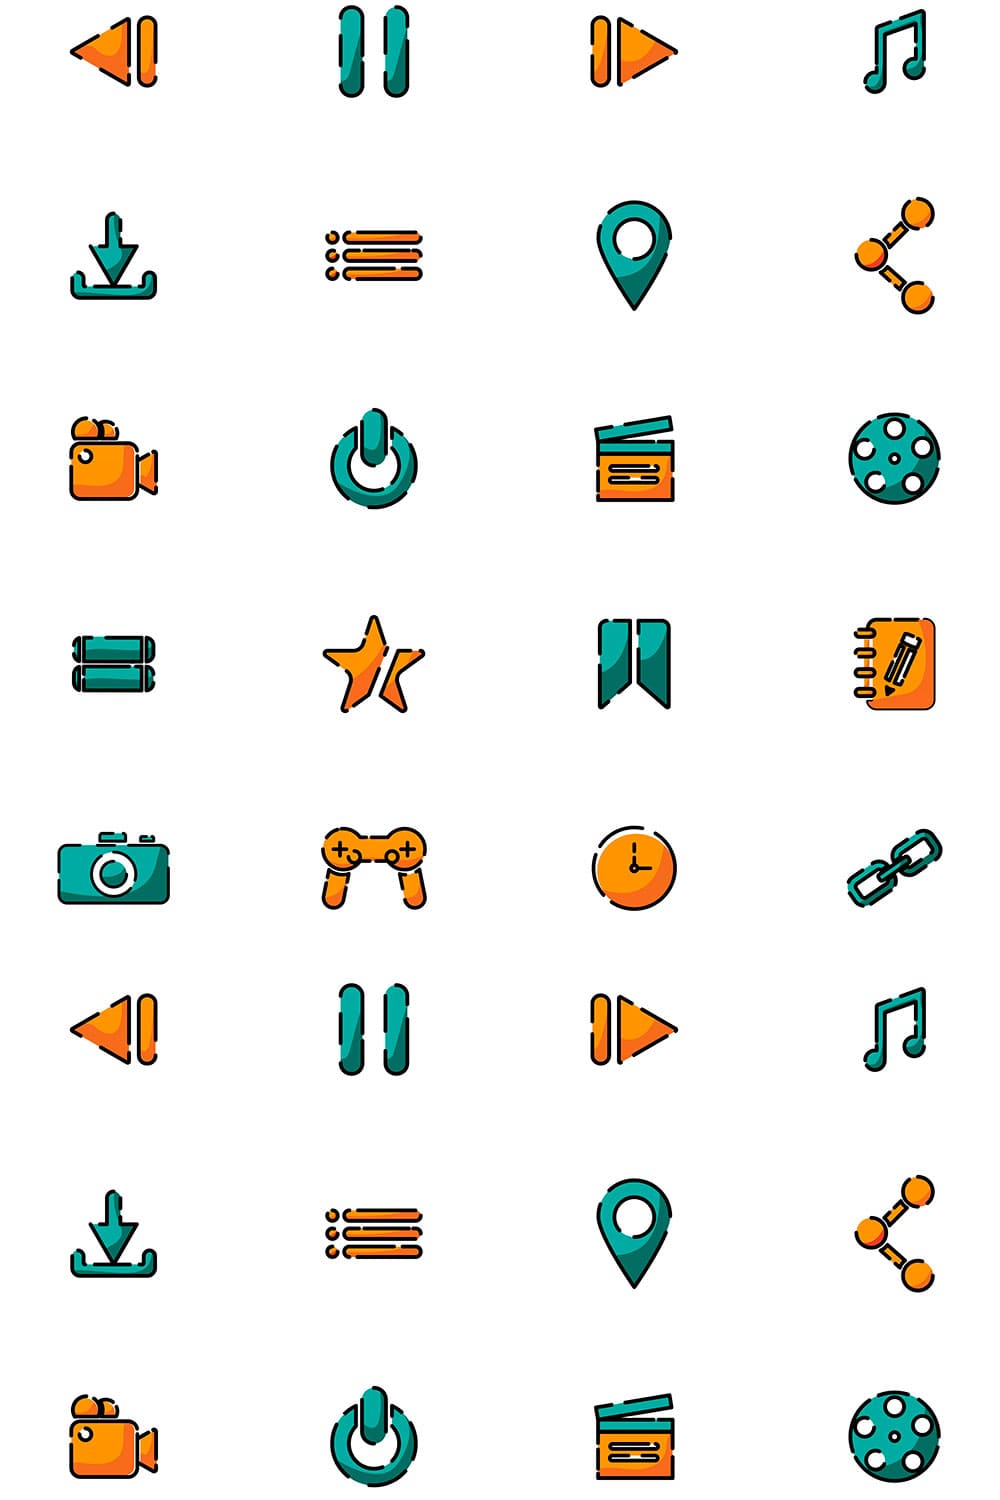 20 mobile set icons, picture for pinterest.